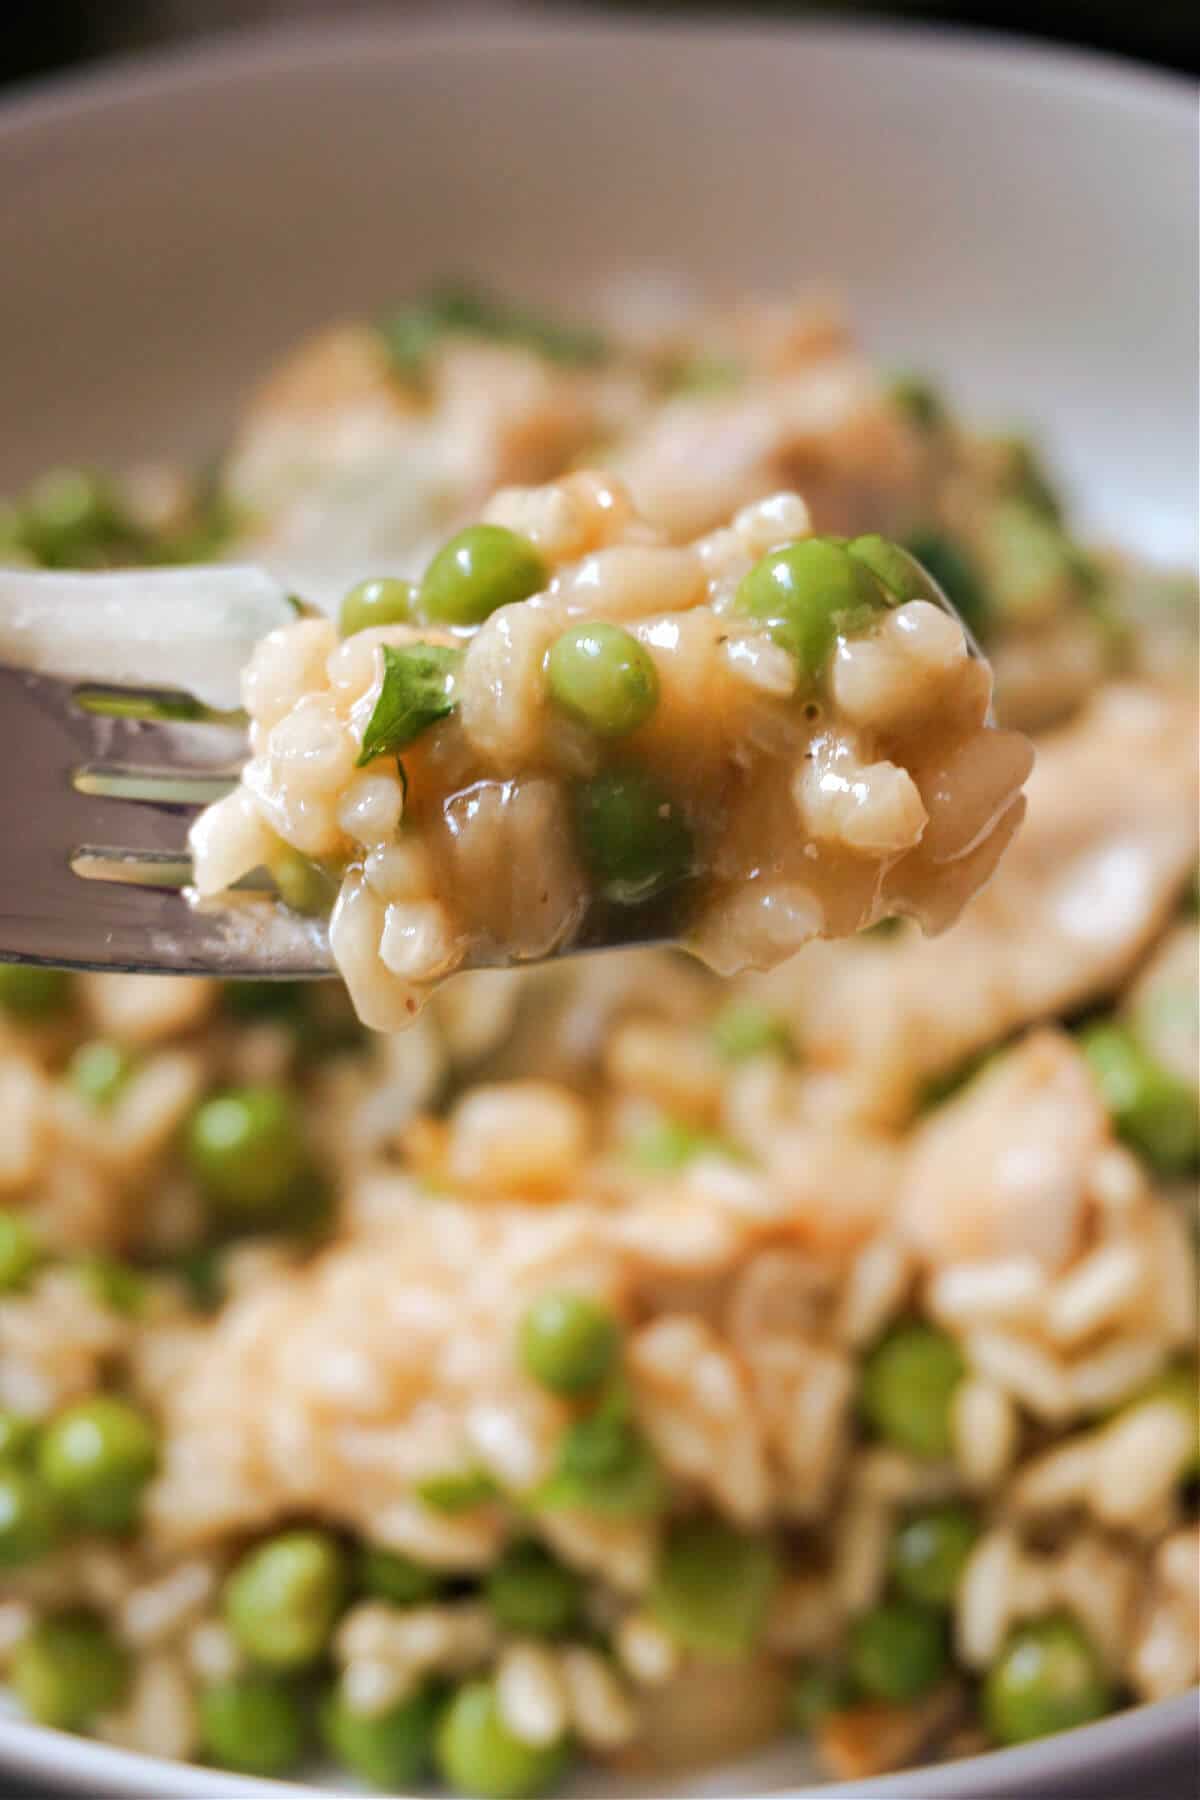 A fork full of risotto.